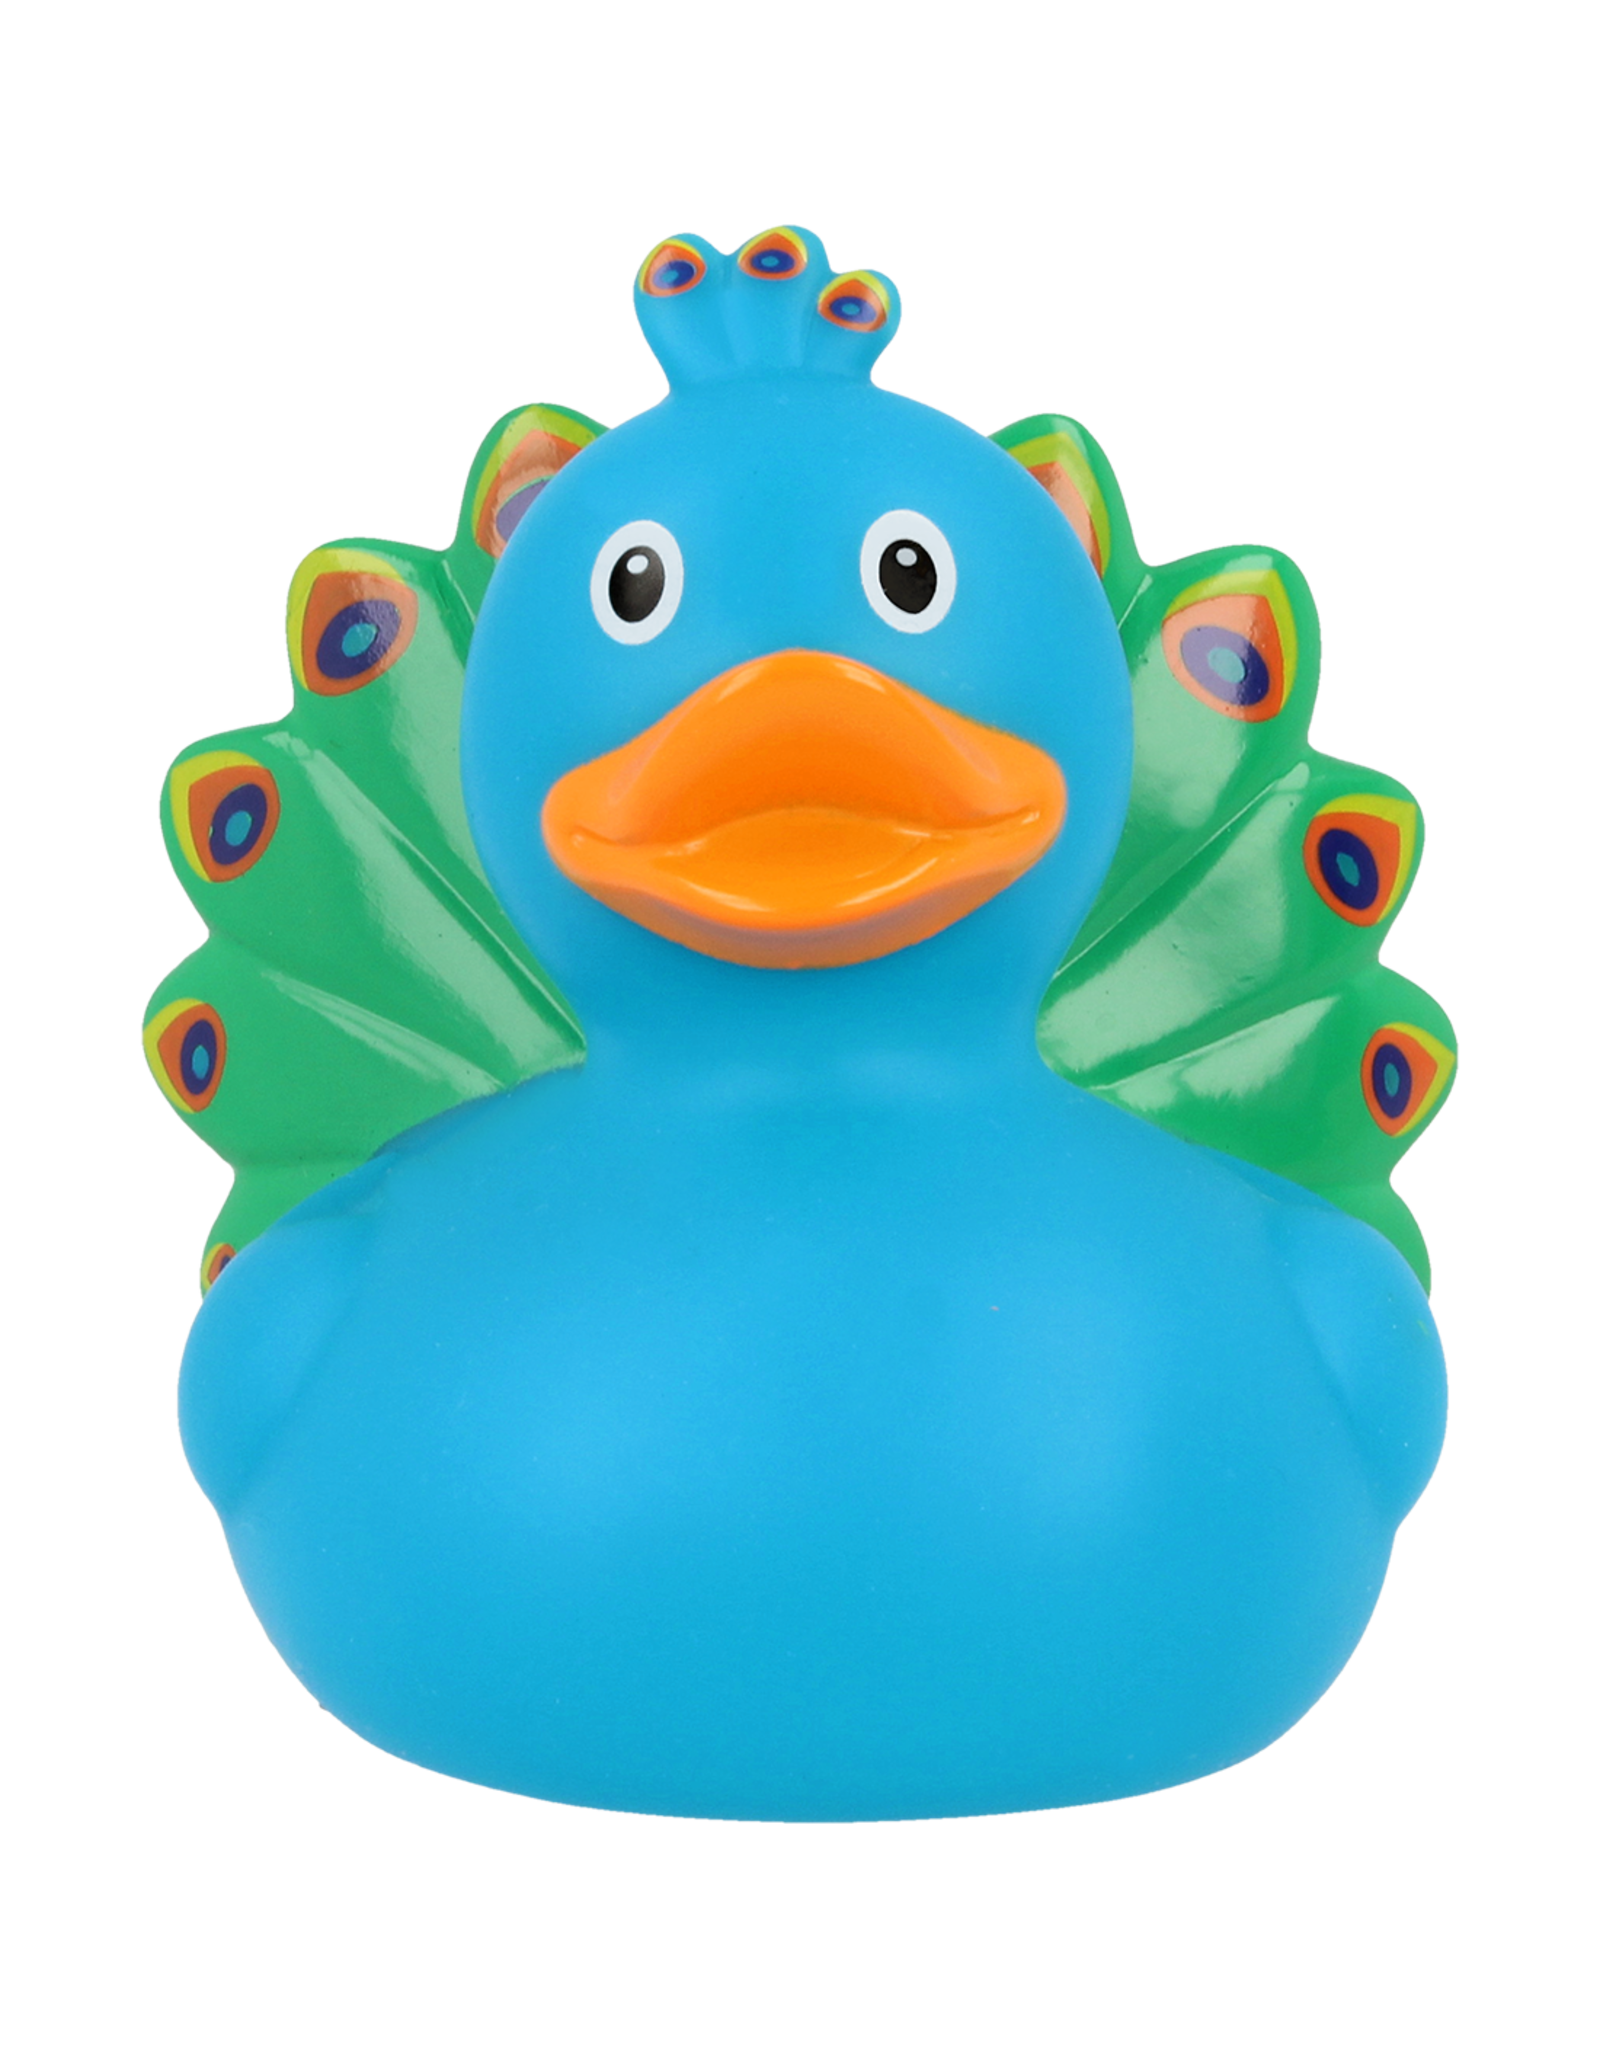 Lilalu Colourful Peacock Rubber Duck